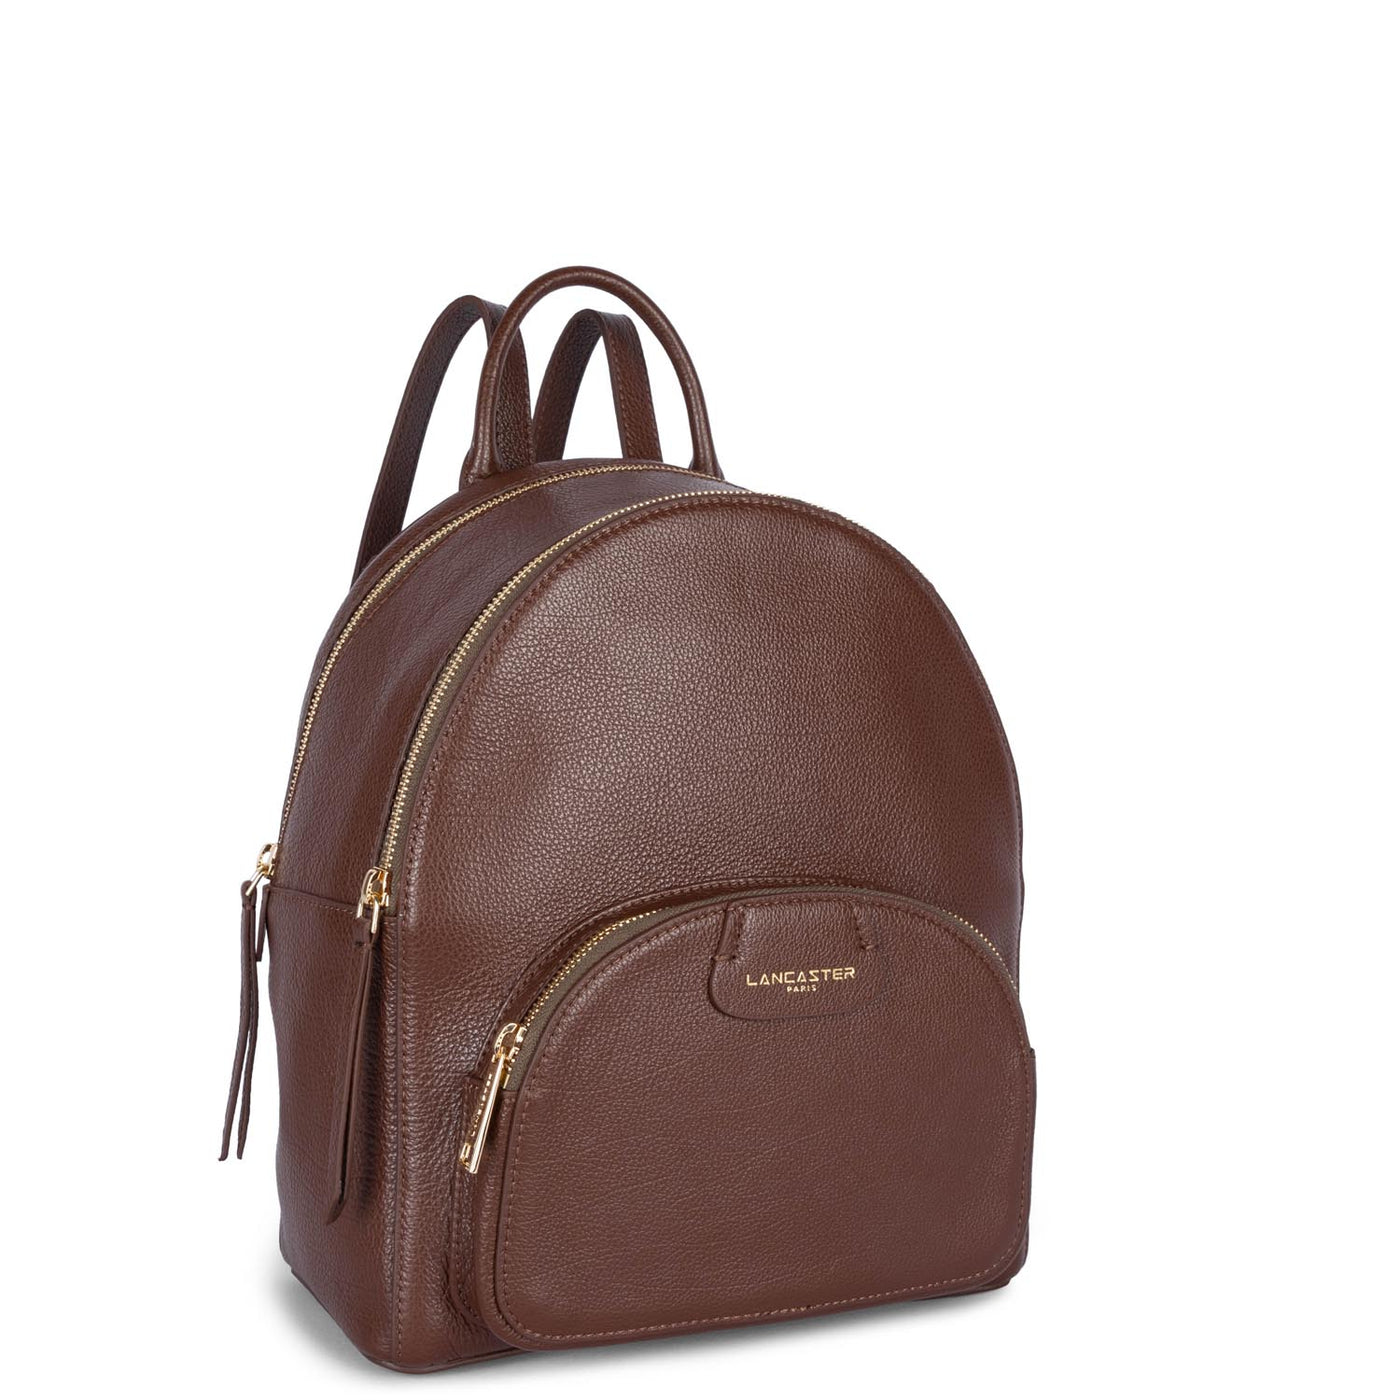 m backpack - dune #couleur_chataigne